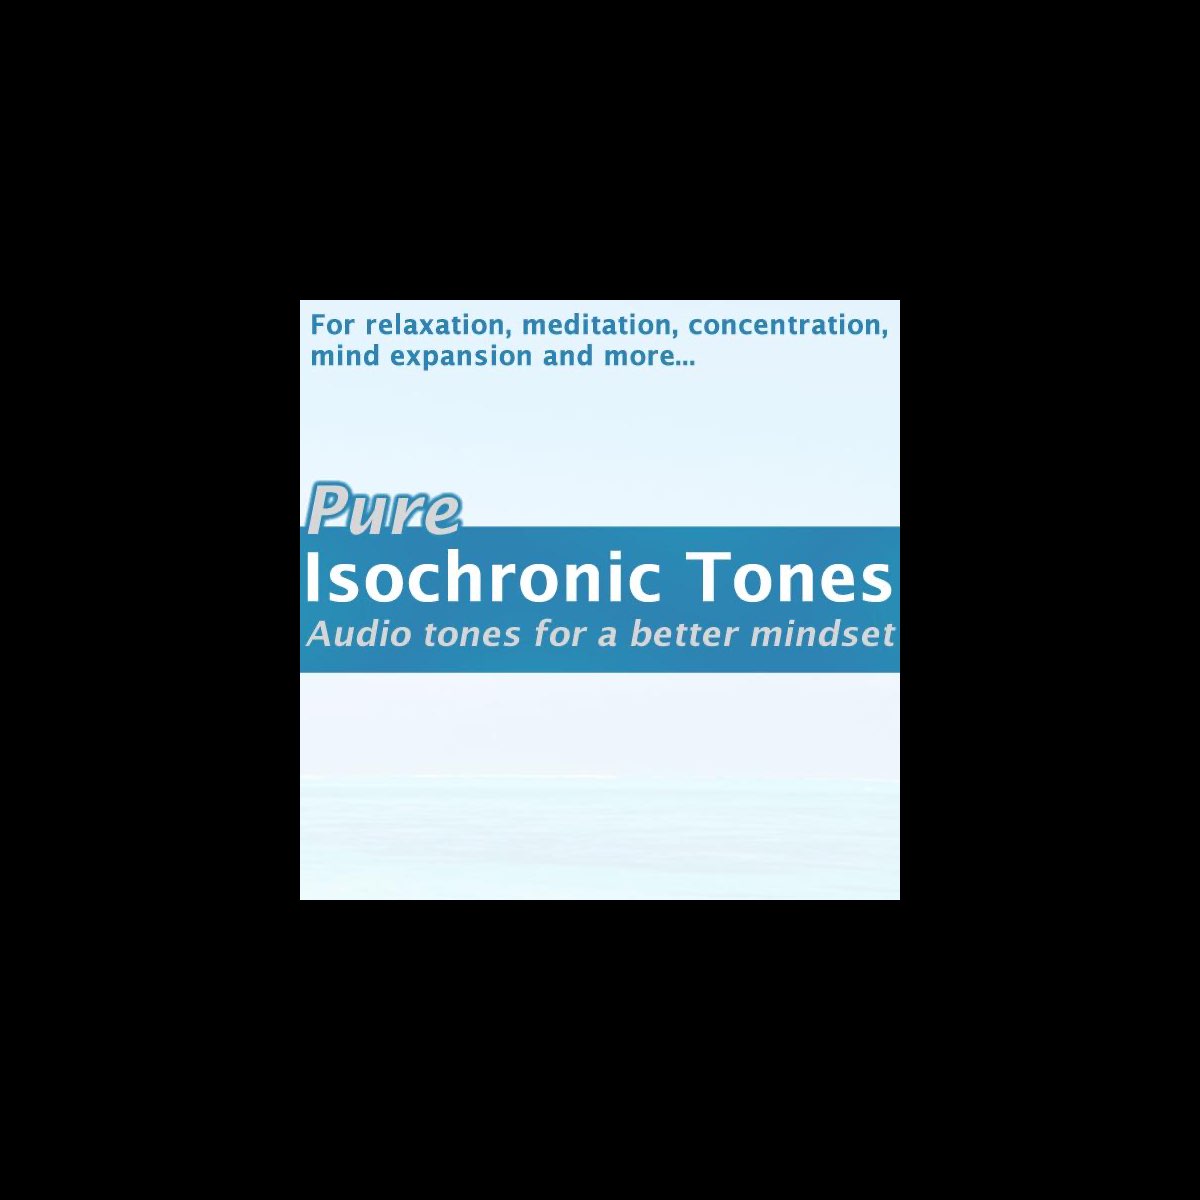 Pure Isochronic Tones by Isochronic Tones on iTunes